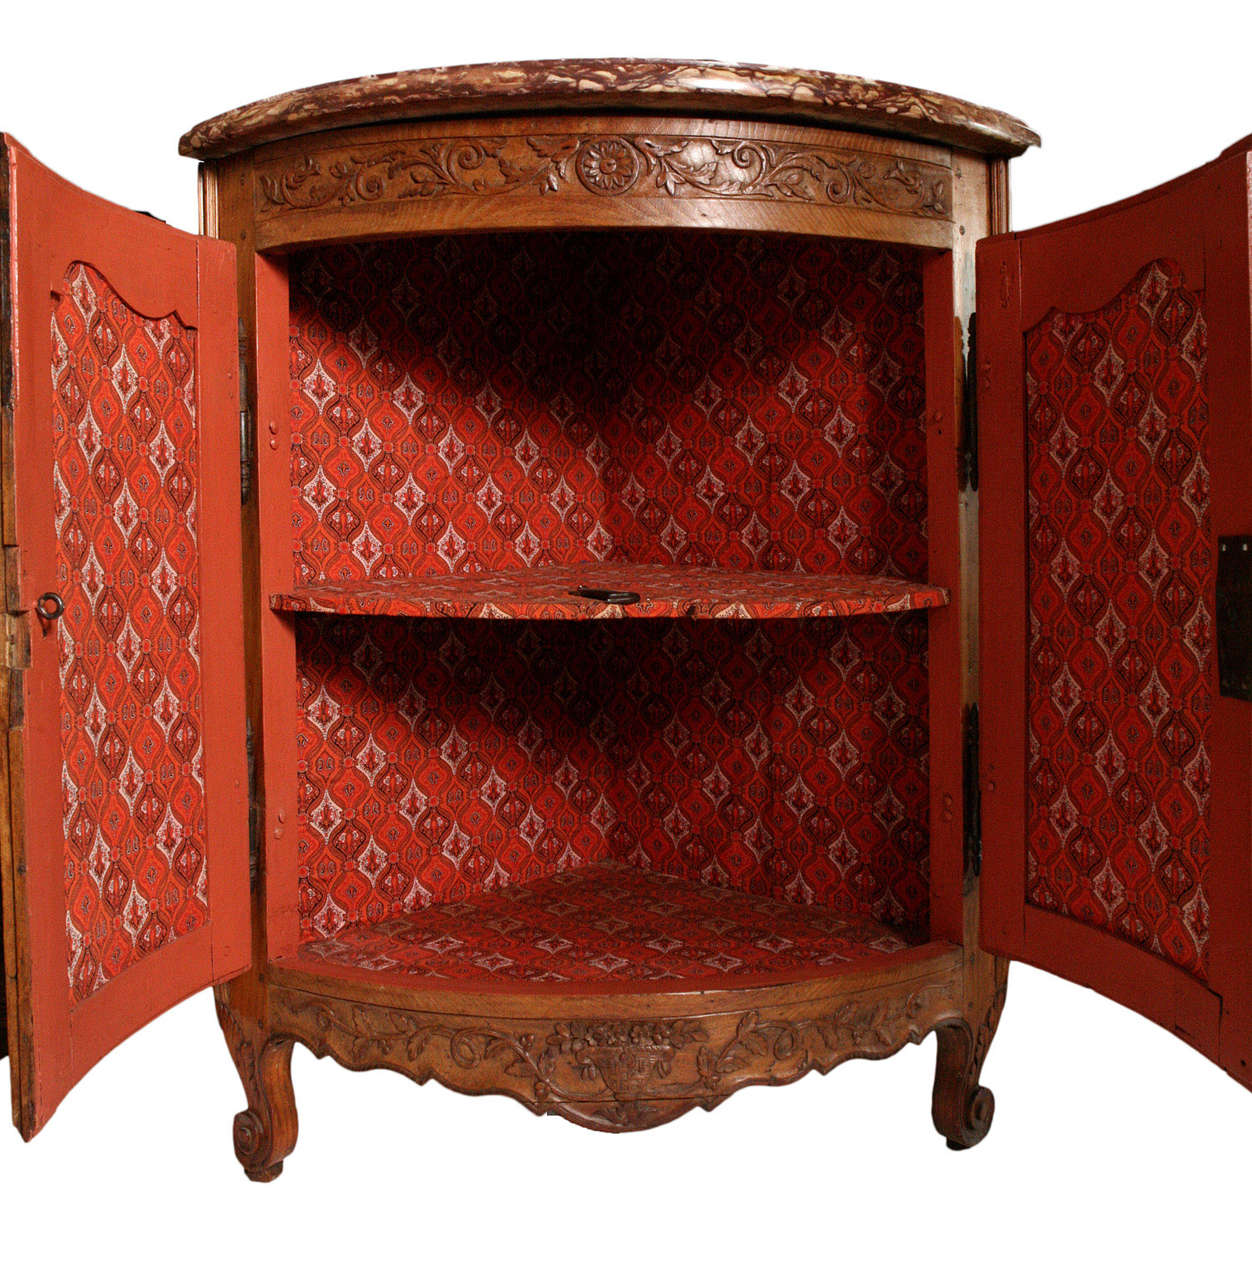 Bowfront corner cabinet with original rouge marble top.  Carved frieze, apron and feet.  Painted interior with fabric.  Lock and key.